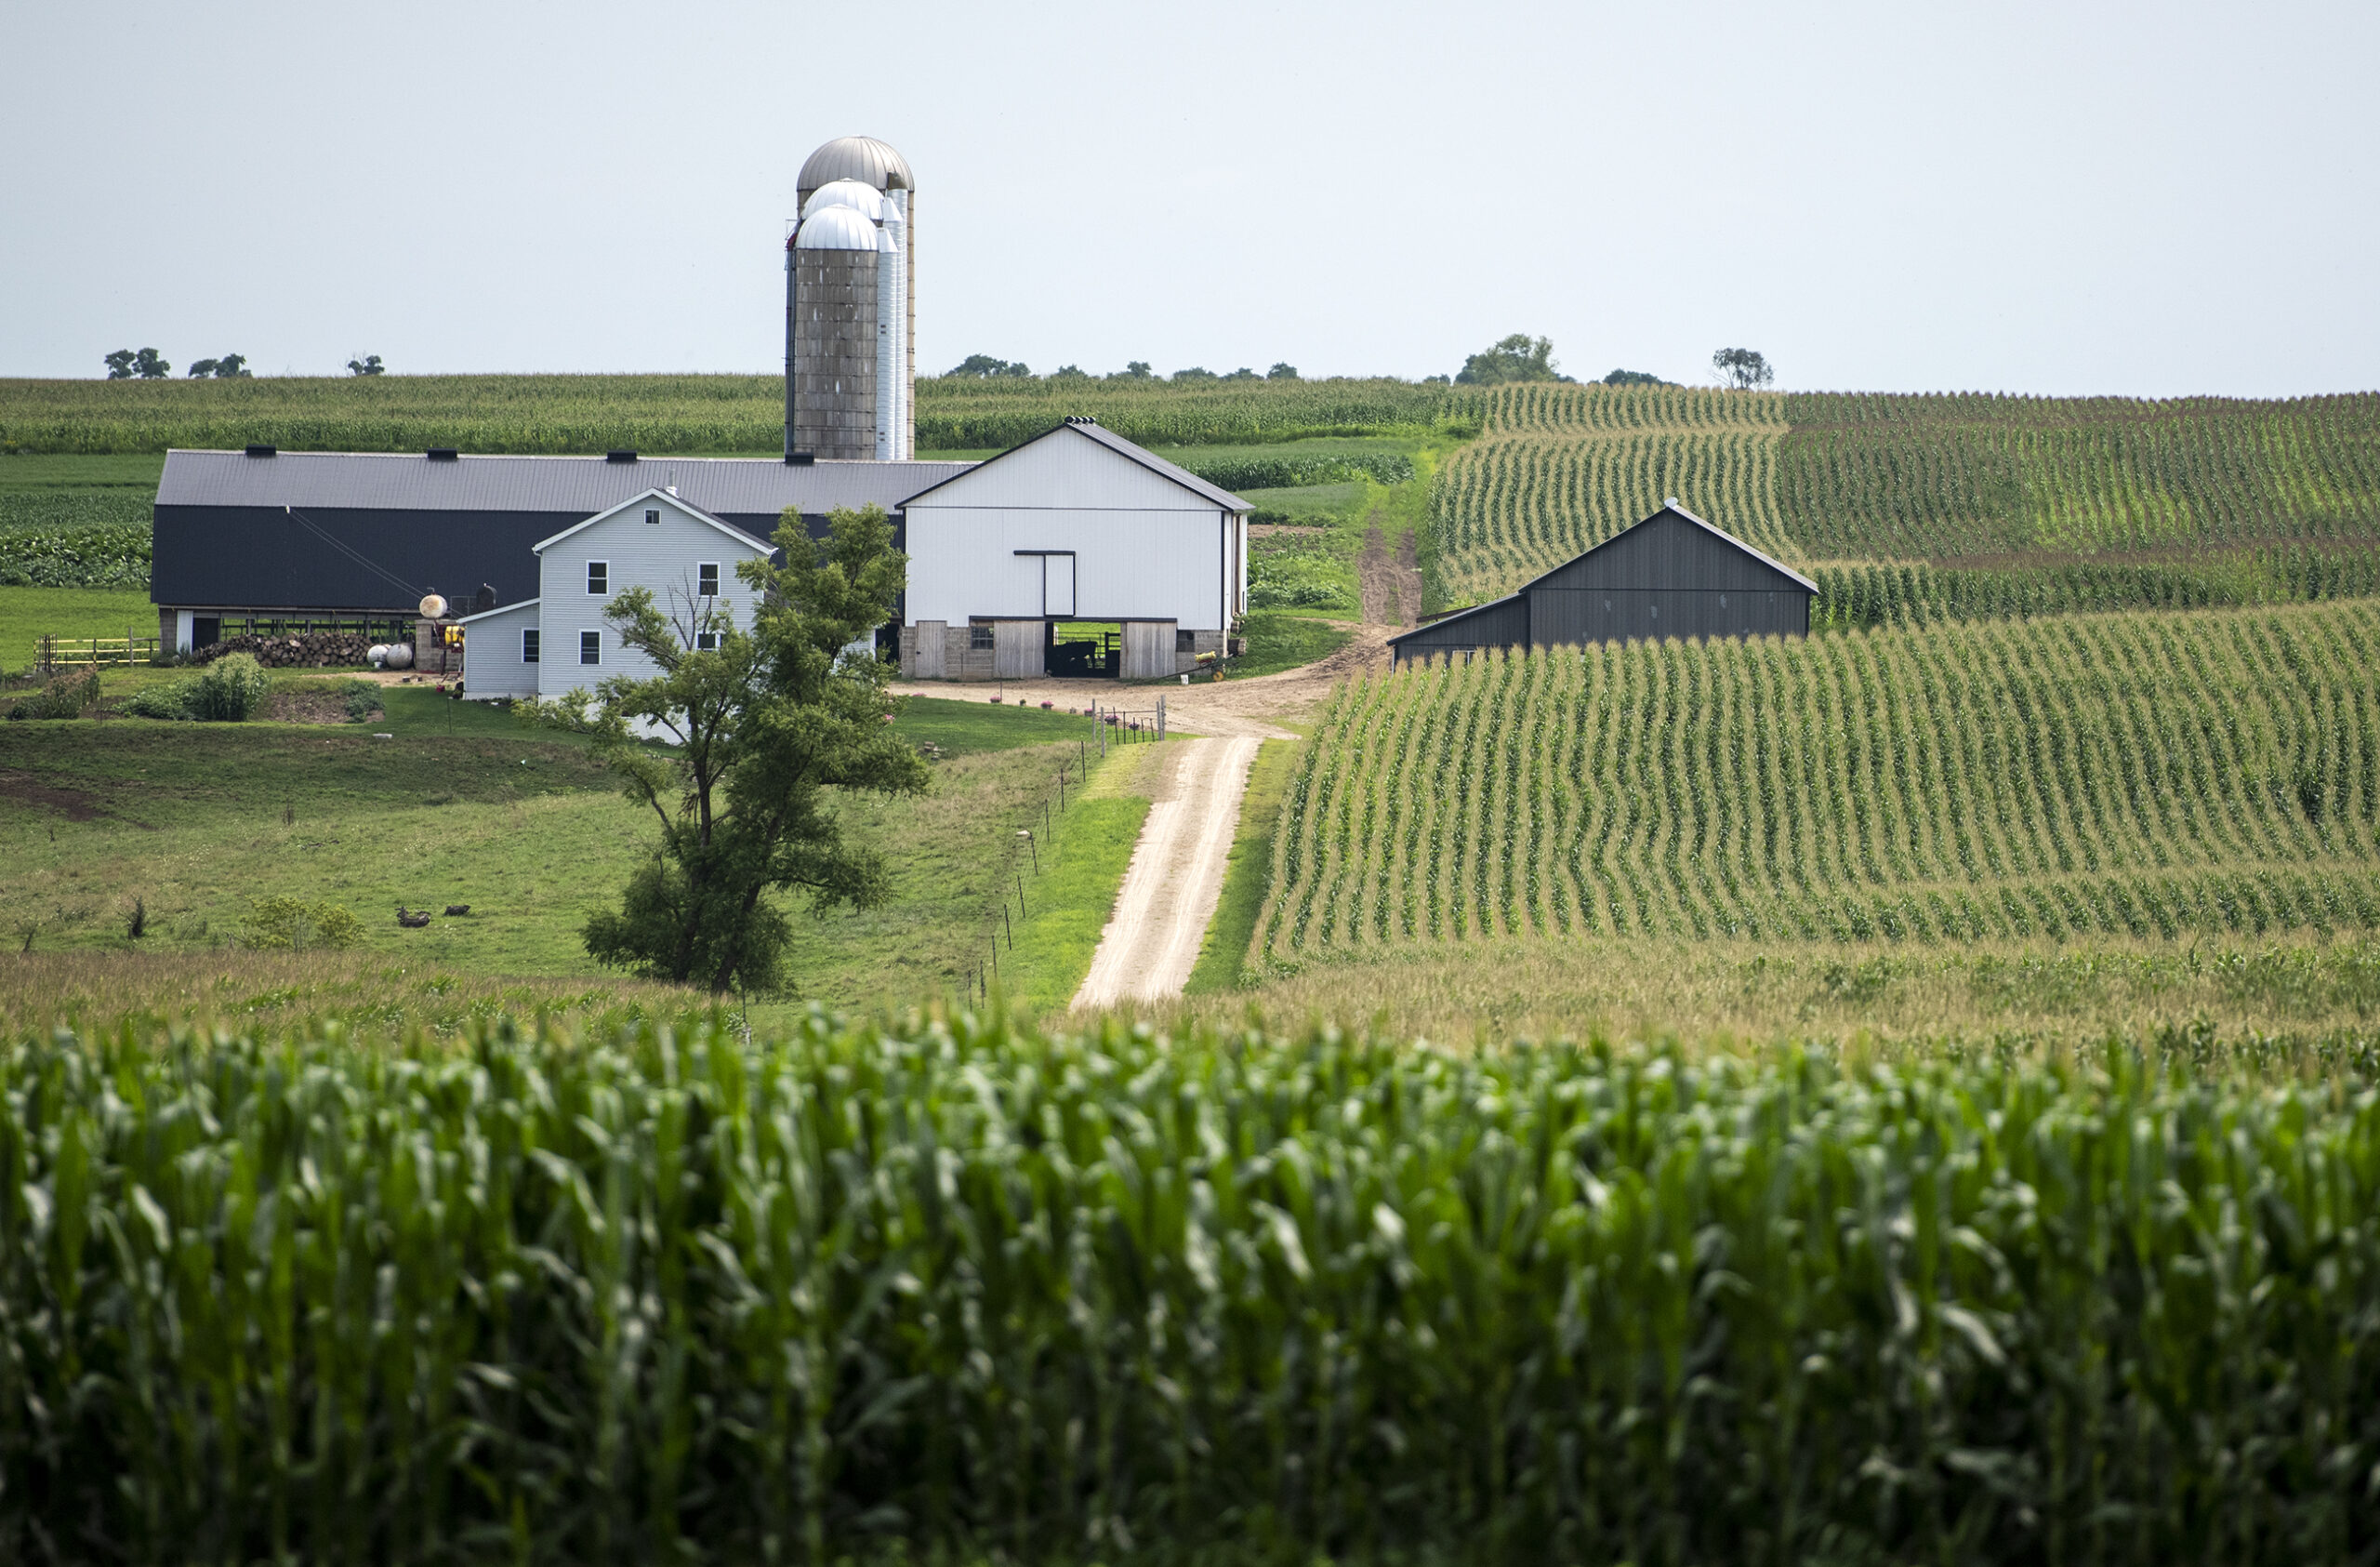 A farm with a white exterior can be seen behind rows and rows of green corn stalks.